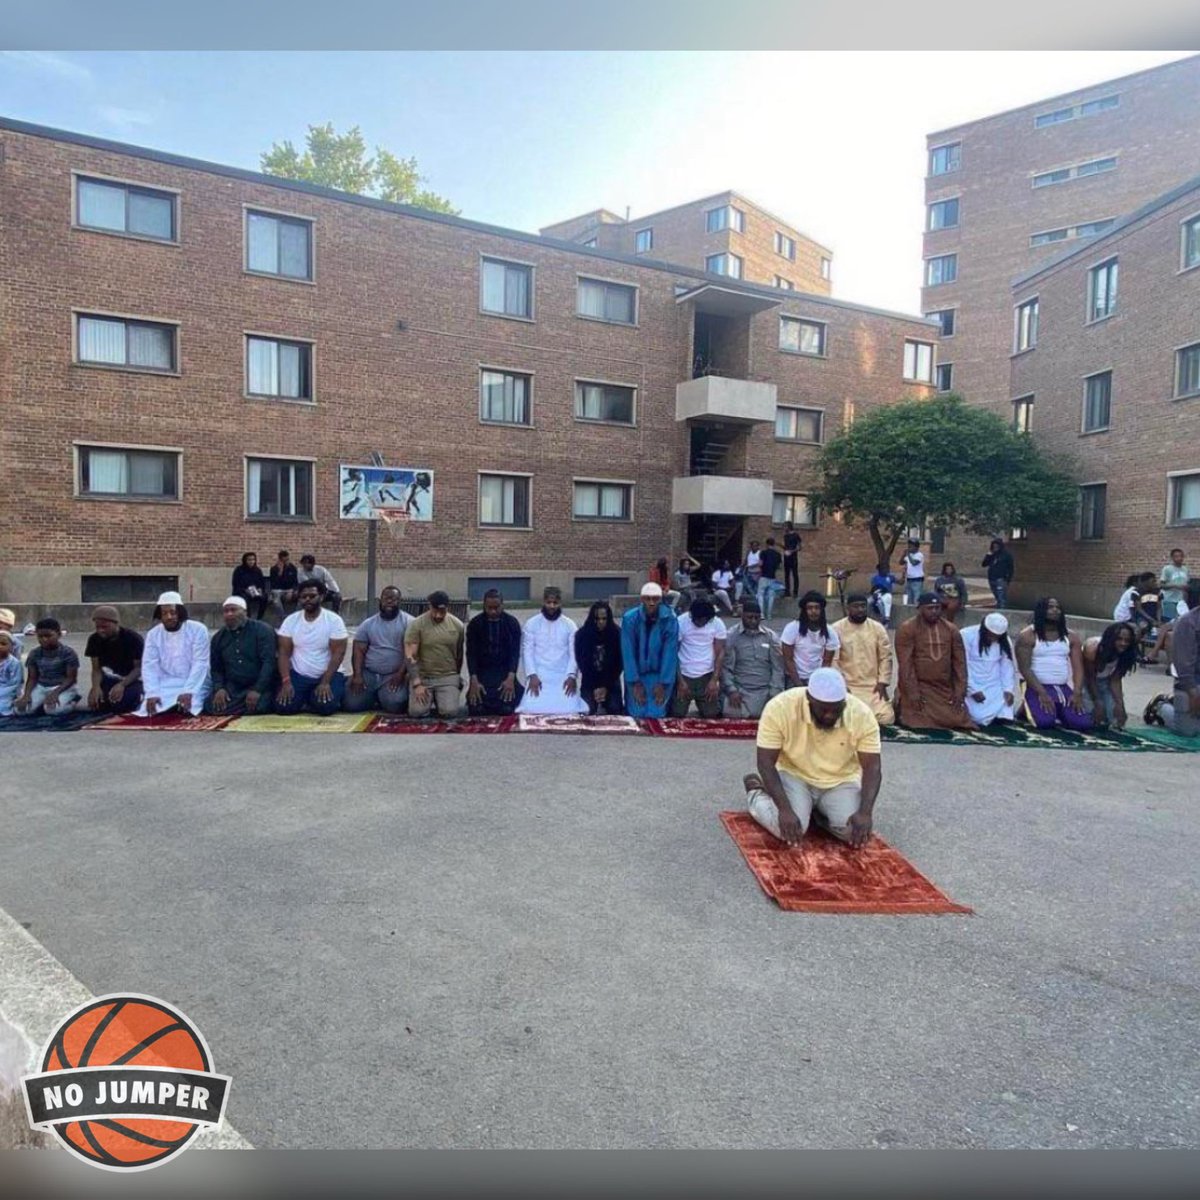 O’Block members seen gathered together praying outside